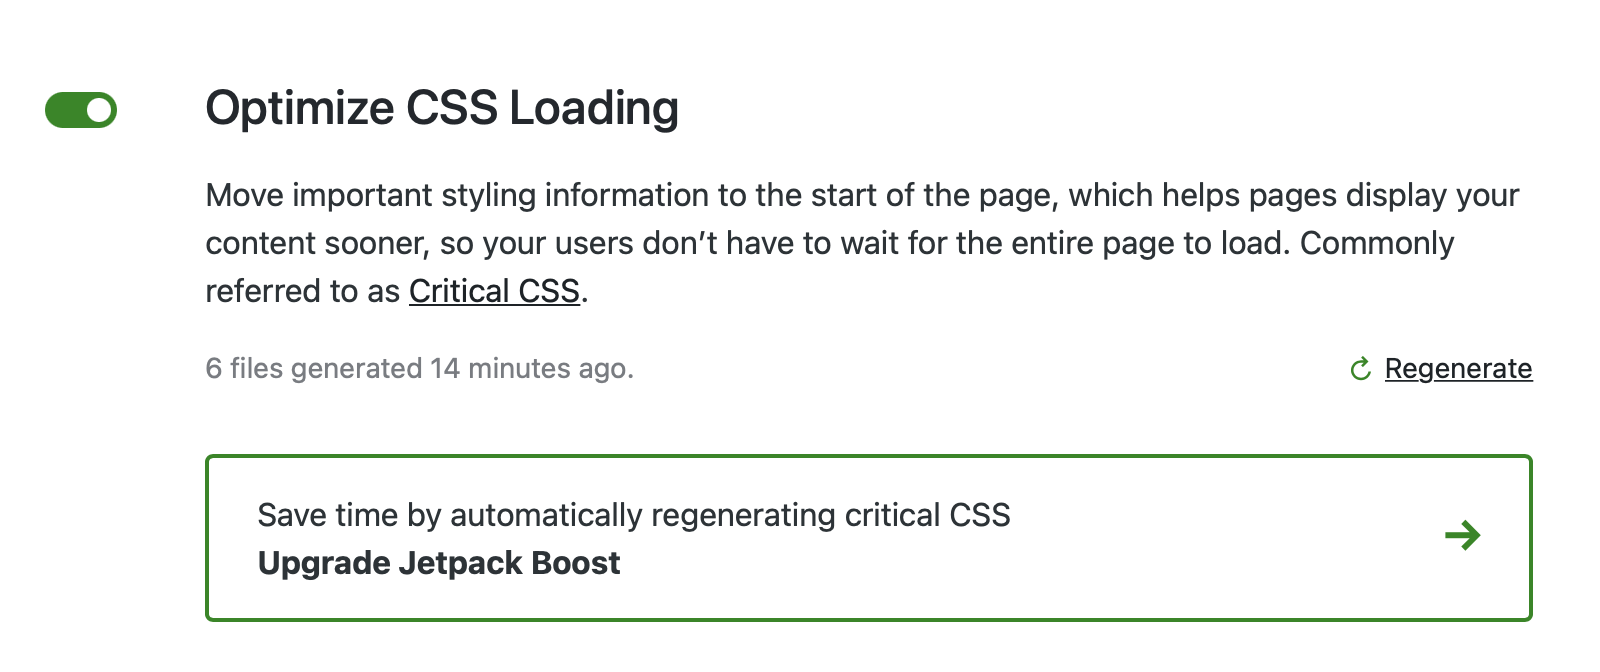 Jetpack Boost settings for regenerating Critical CSS.